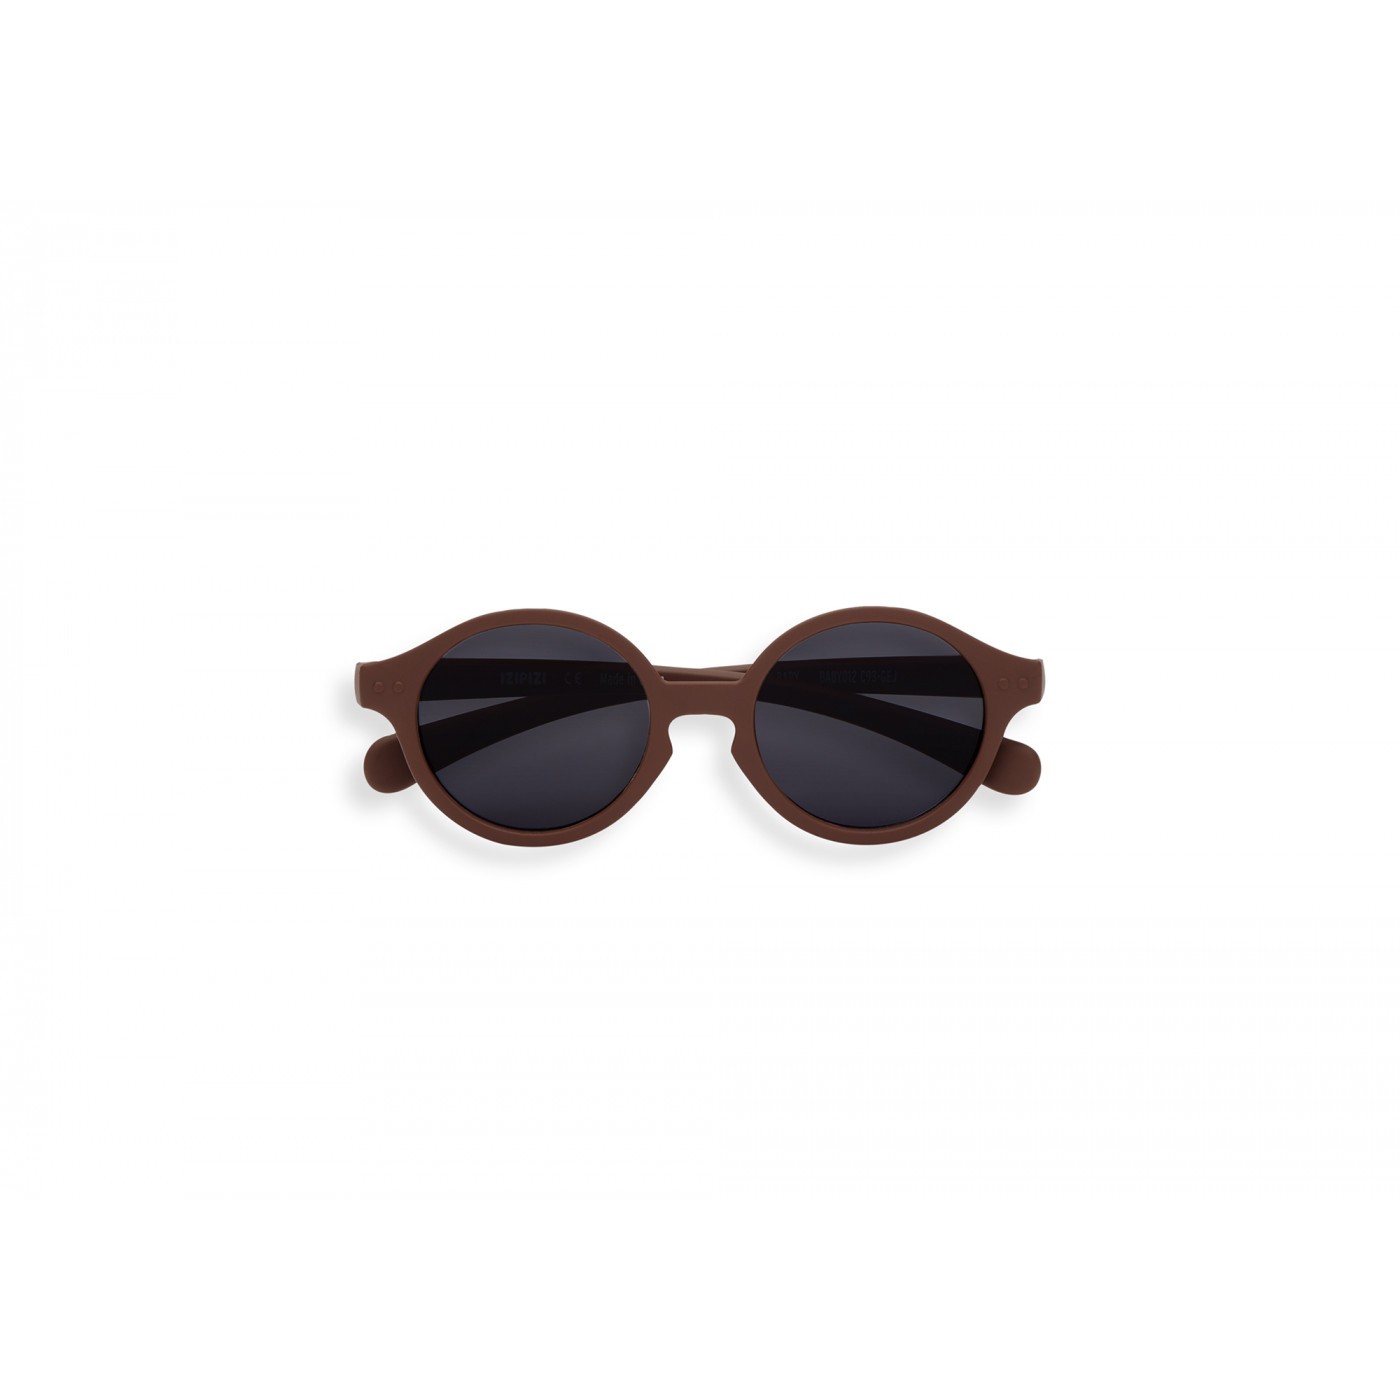 sun-baby-chocolate-lunettes-soleil-bebe (1)